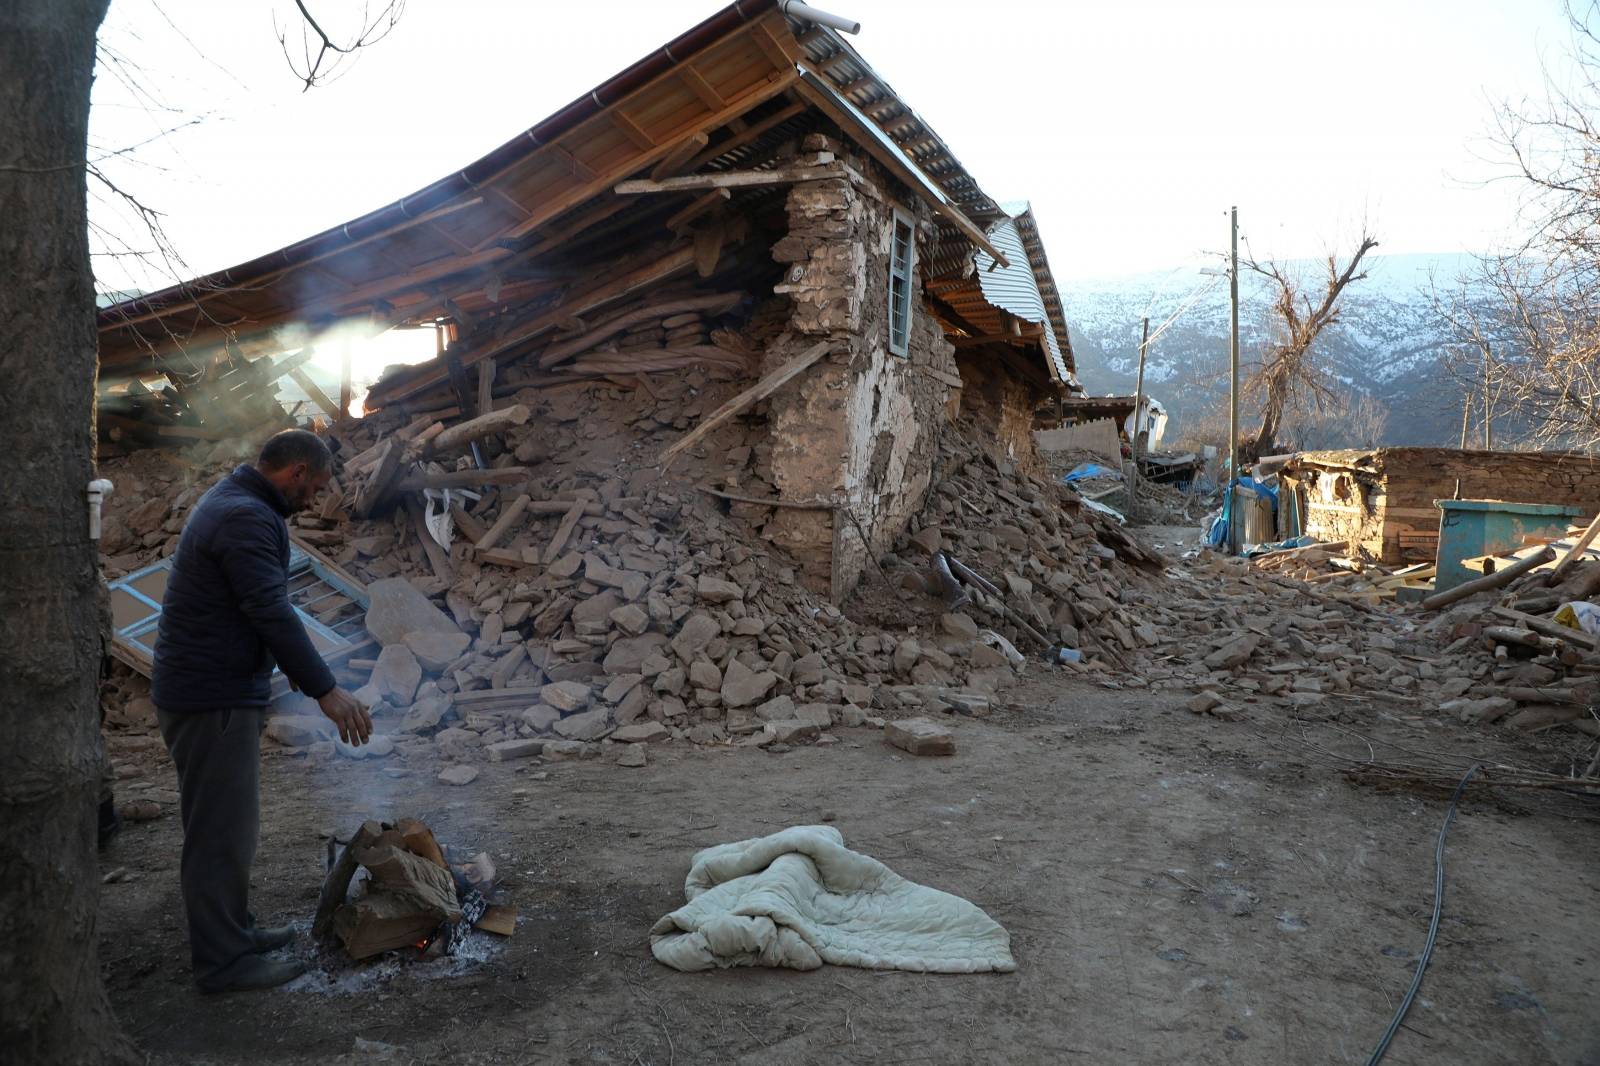 A villager stands next to his collapsed house after an earthquake in Sivrice near Elazig